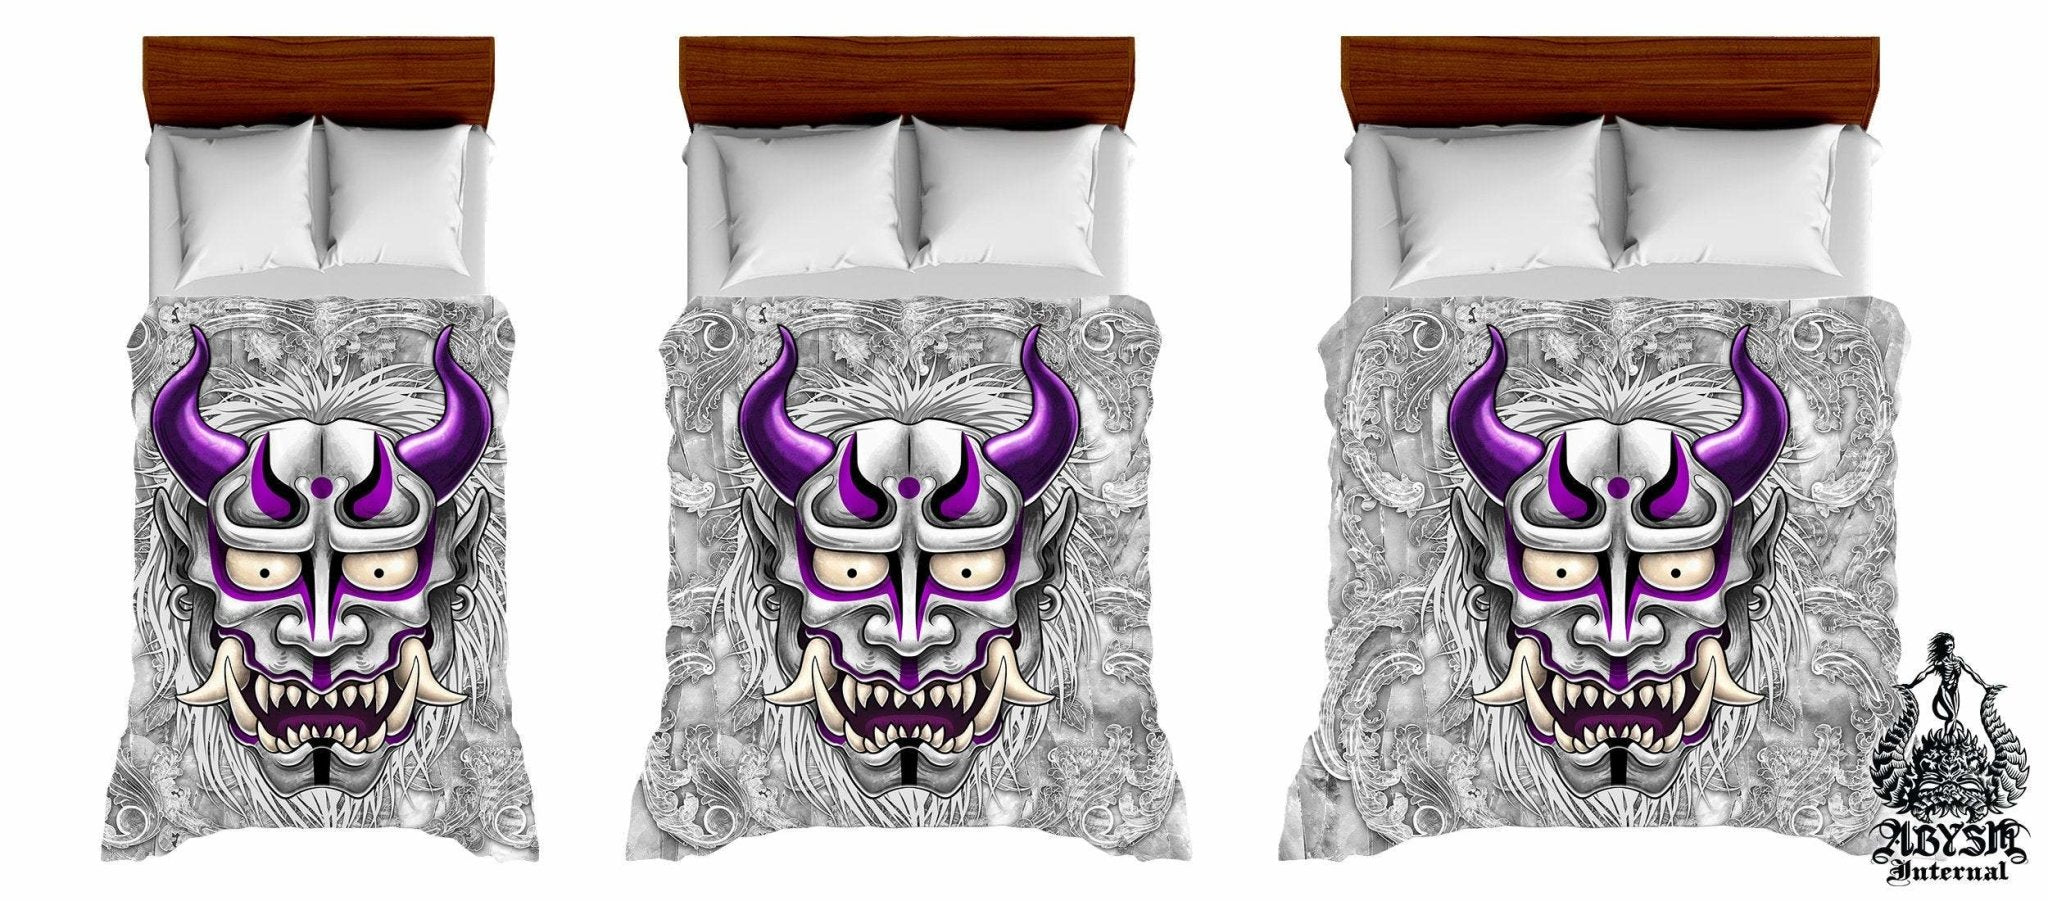 Oni Bedding Set, Comforter and Duvet, White Goth Bed Cover and Bedroom Decor, Japanese Demon, King, Queen and Twin Size - Stone - Abysm Internal